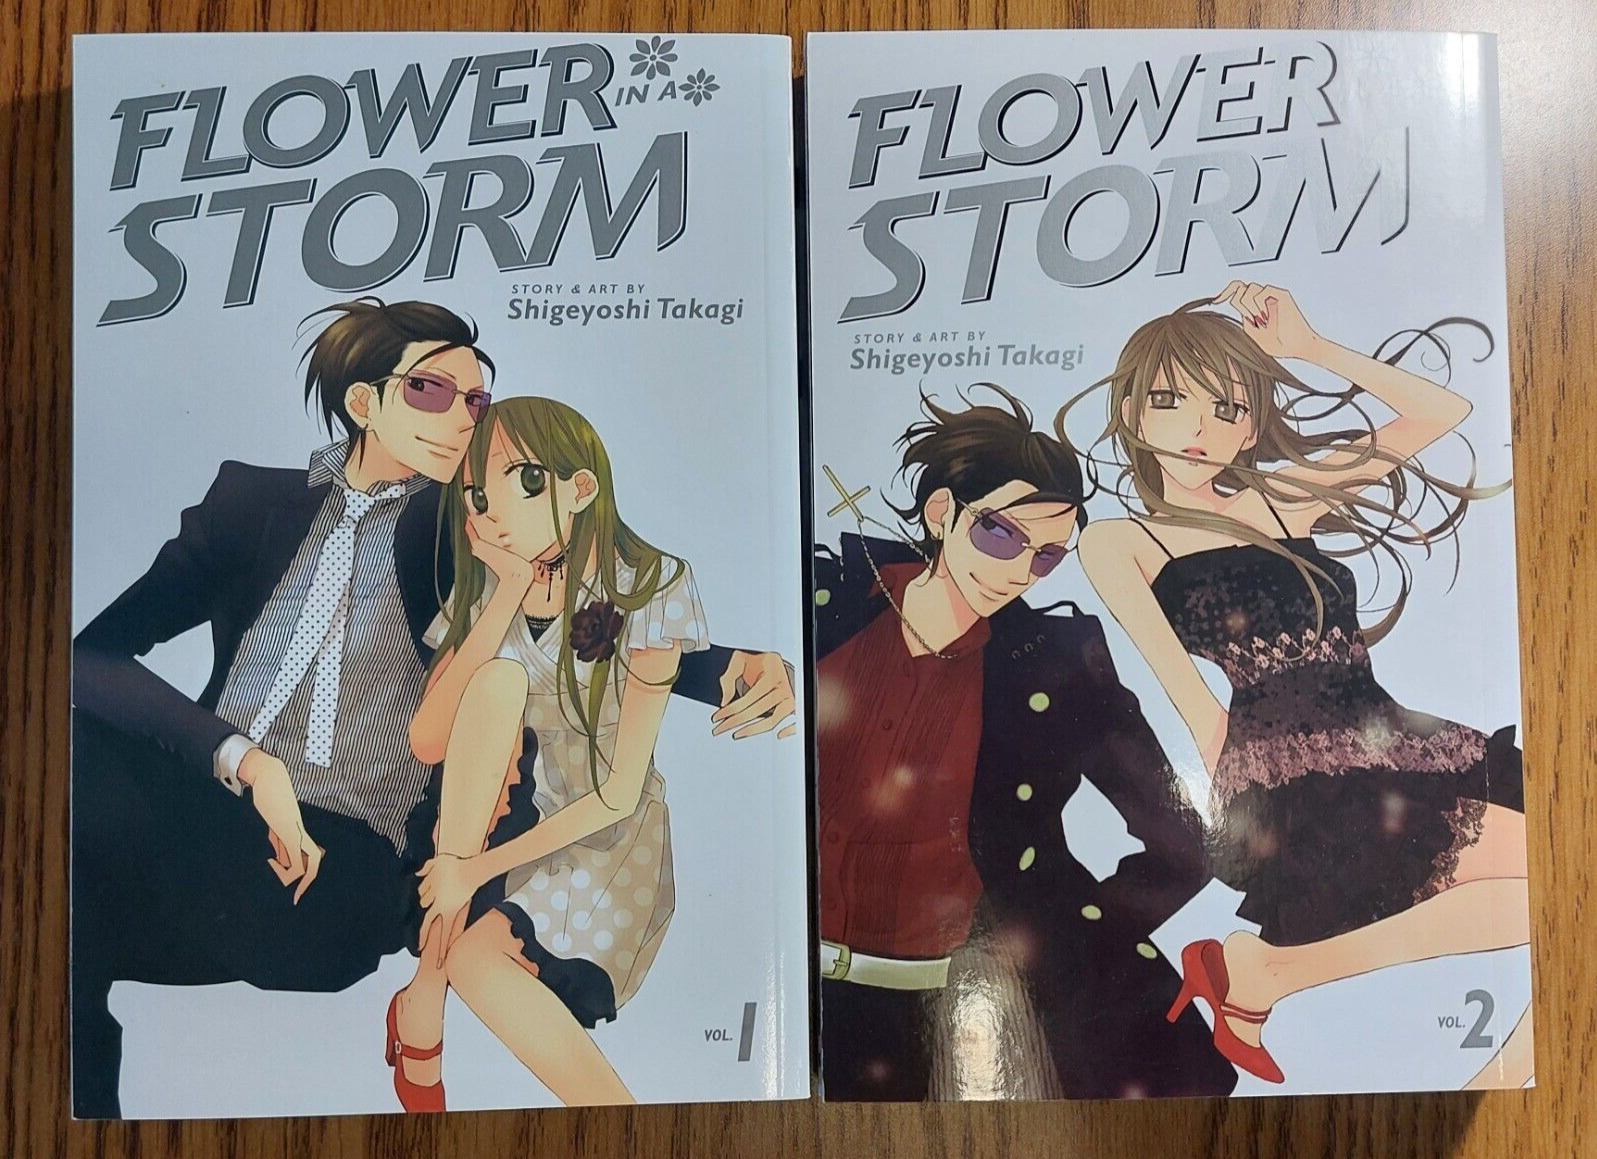 FLOWER IN A STORM ENGLISH MANGA COMPLETE VOLUMES 1 & 2